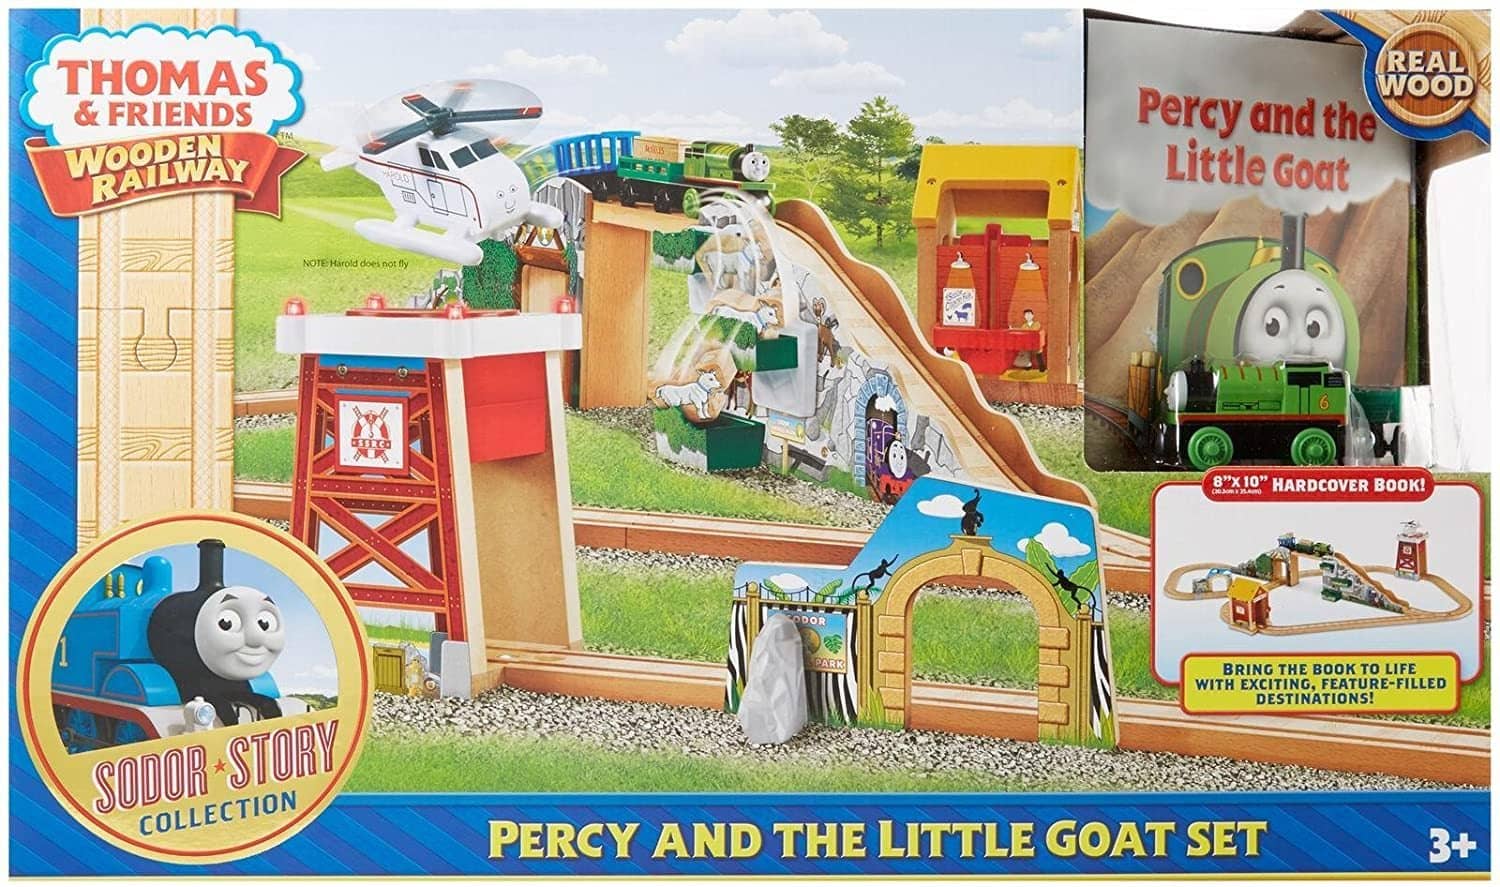 Thomas & Friends Wooden Railway: Percy And The Little Goat Set-Kidding Around NYC